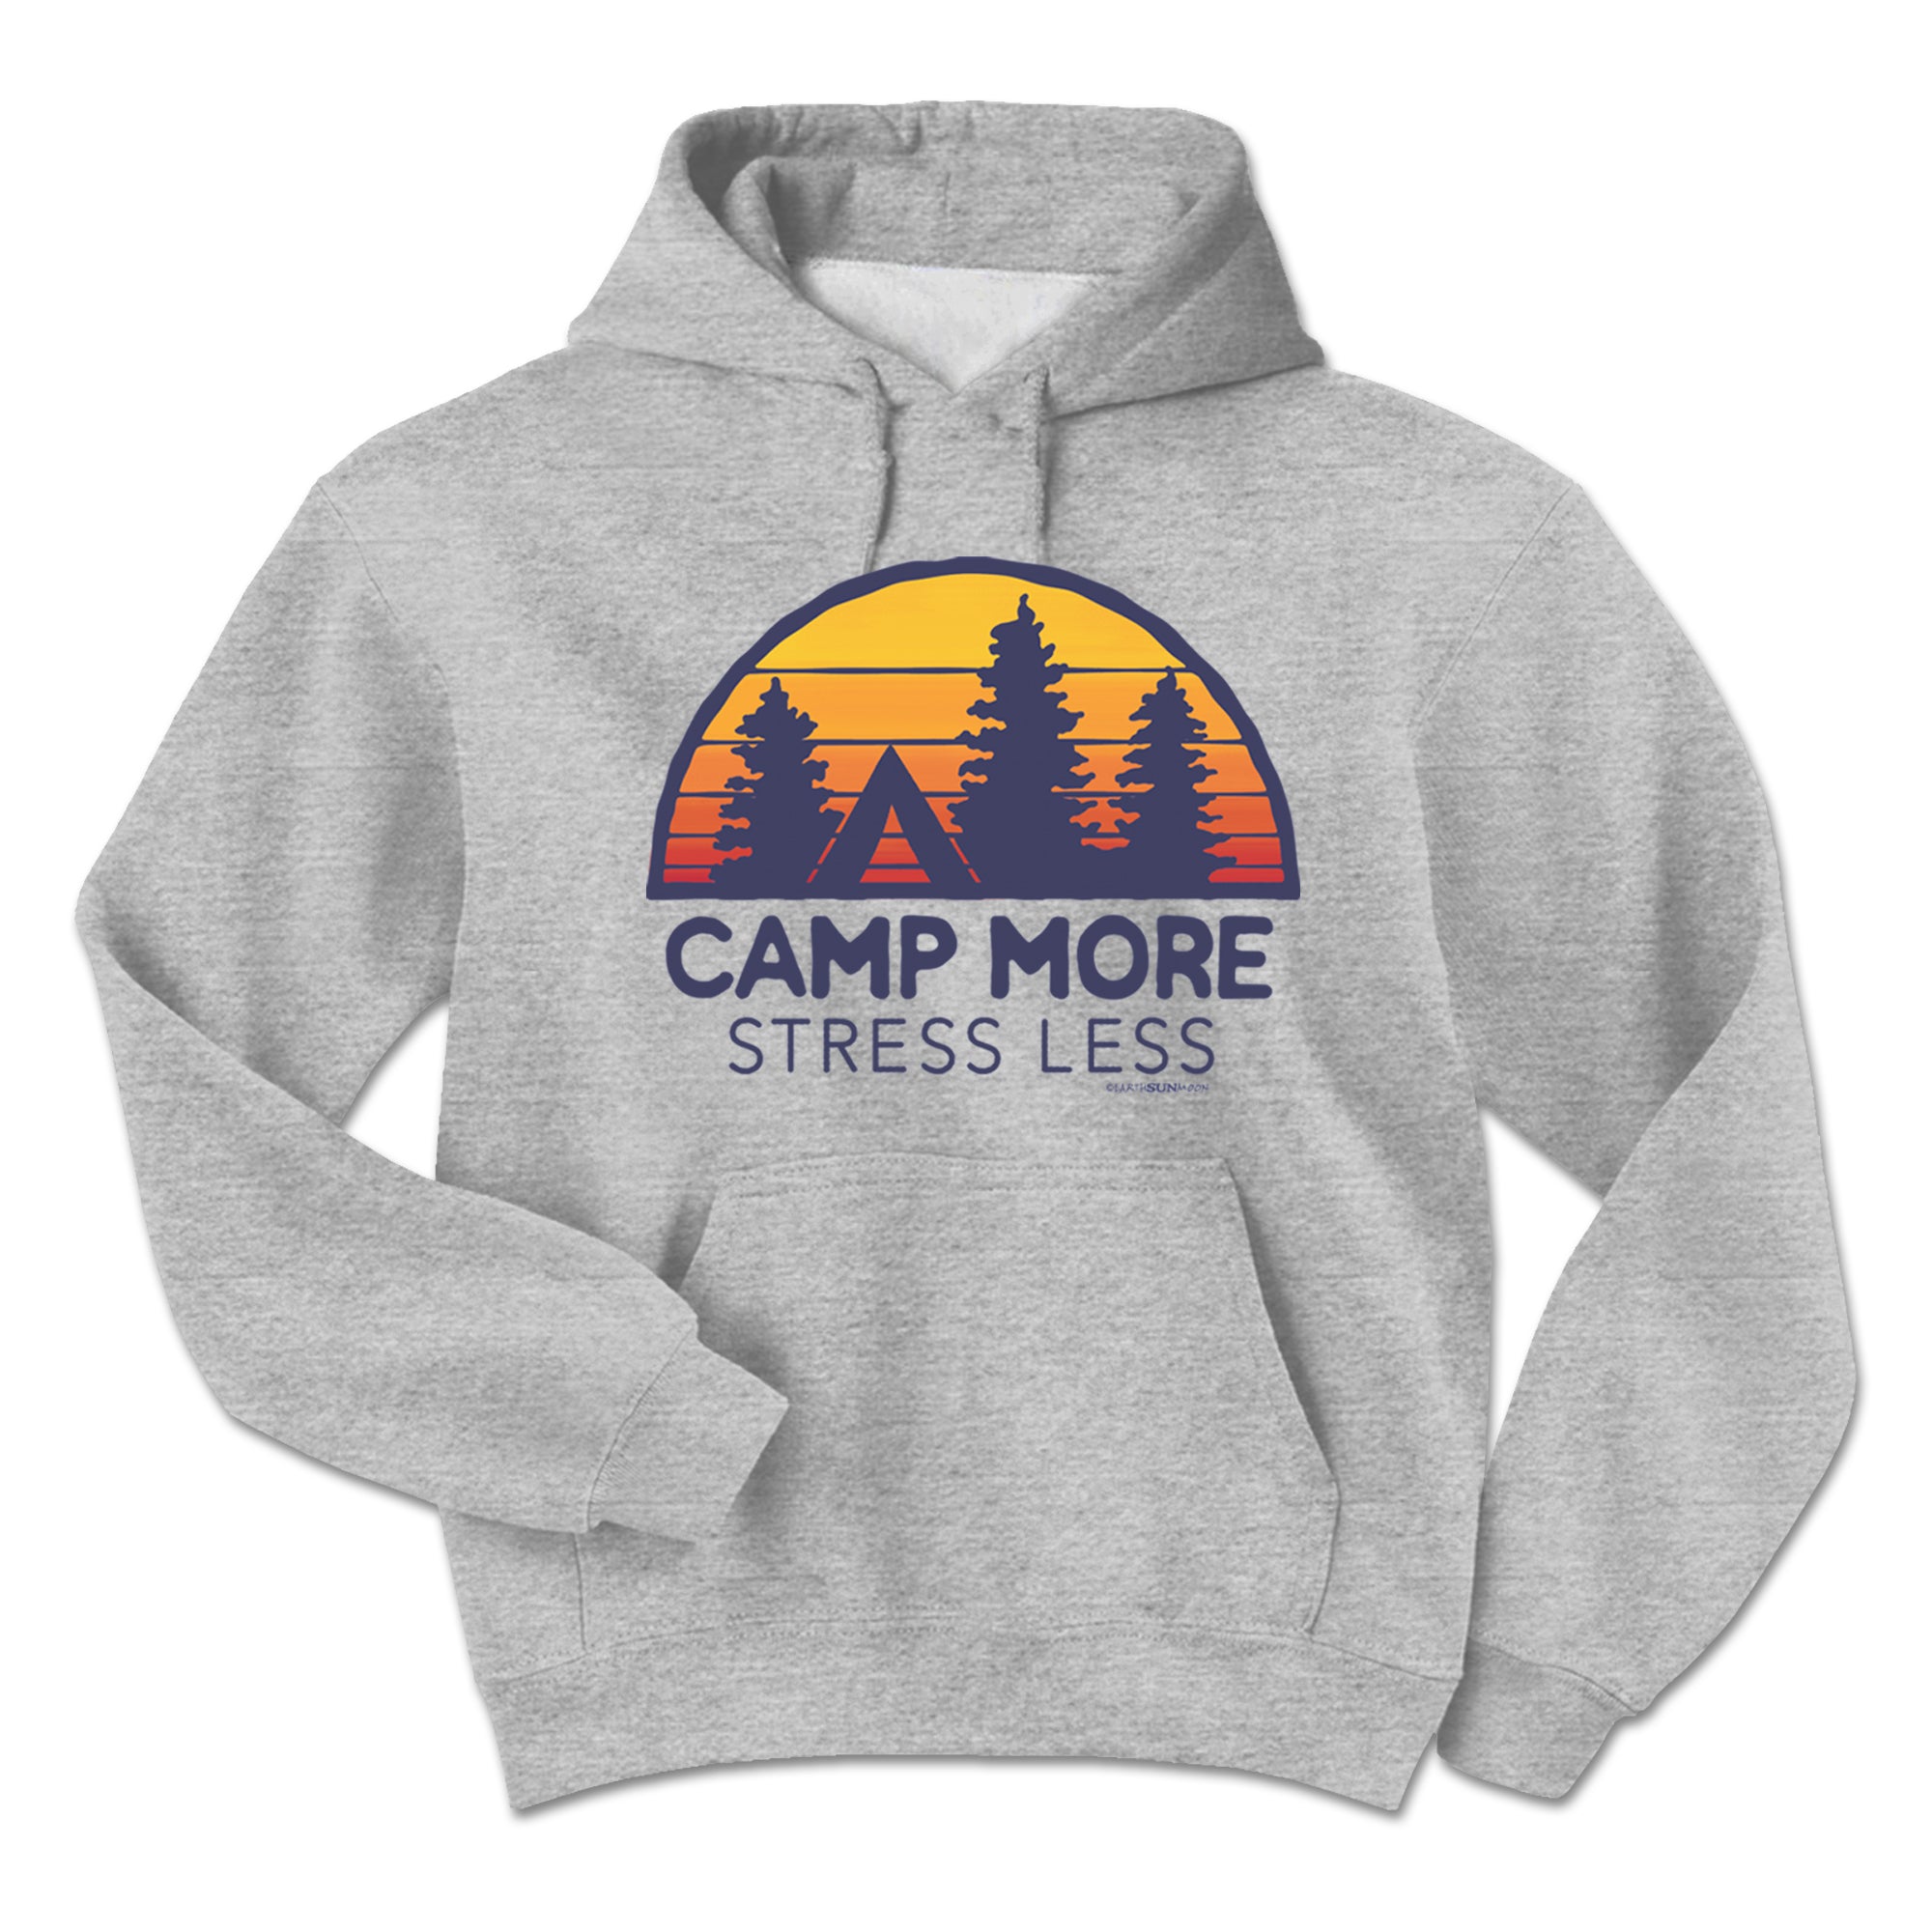 Earth Sun Moon Camp More Stress Less Adult Hoodie - Sports Grey - XL